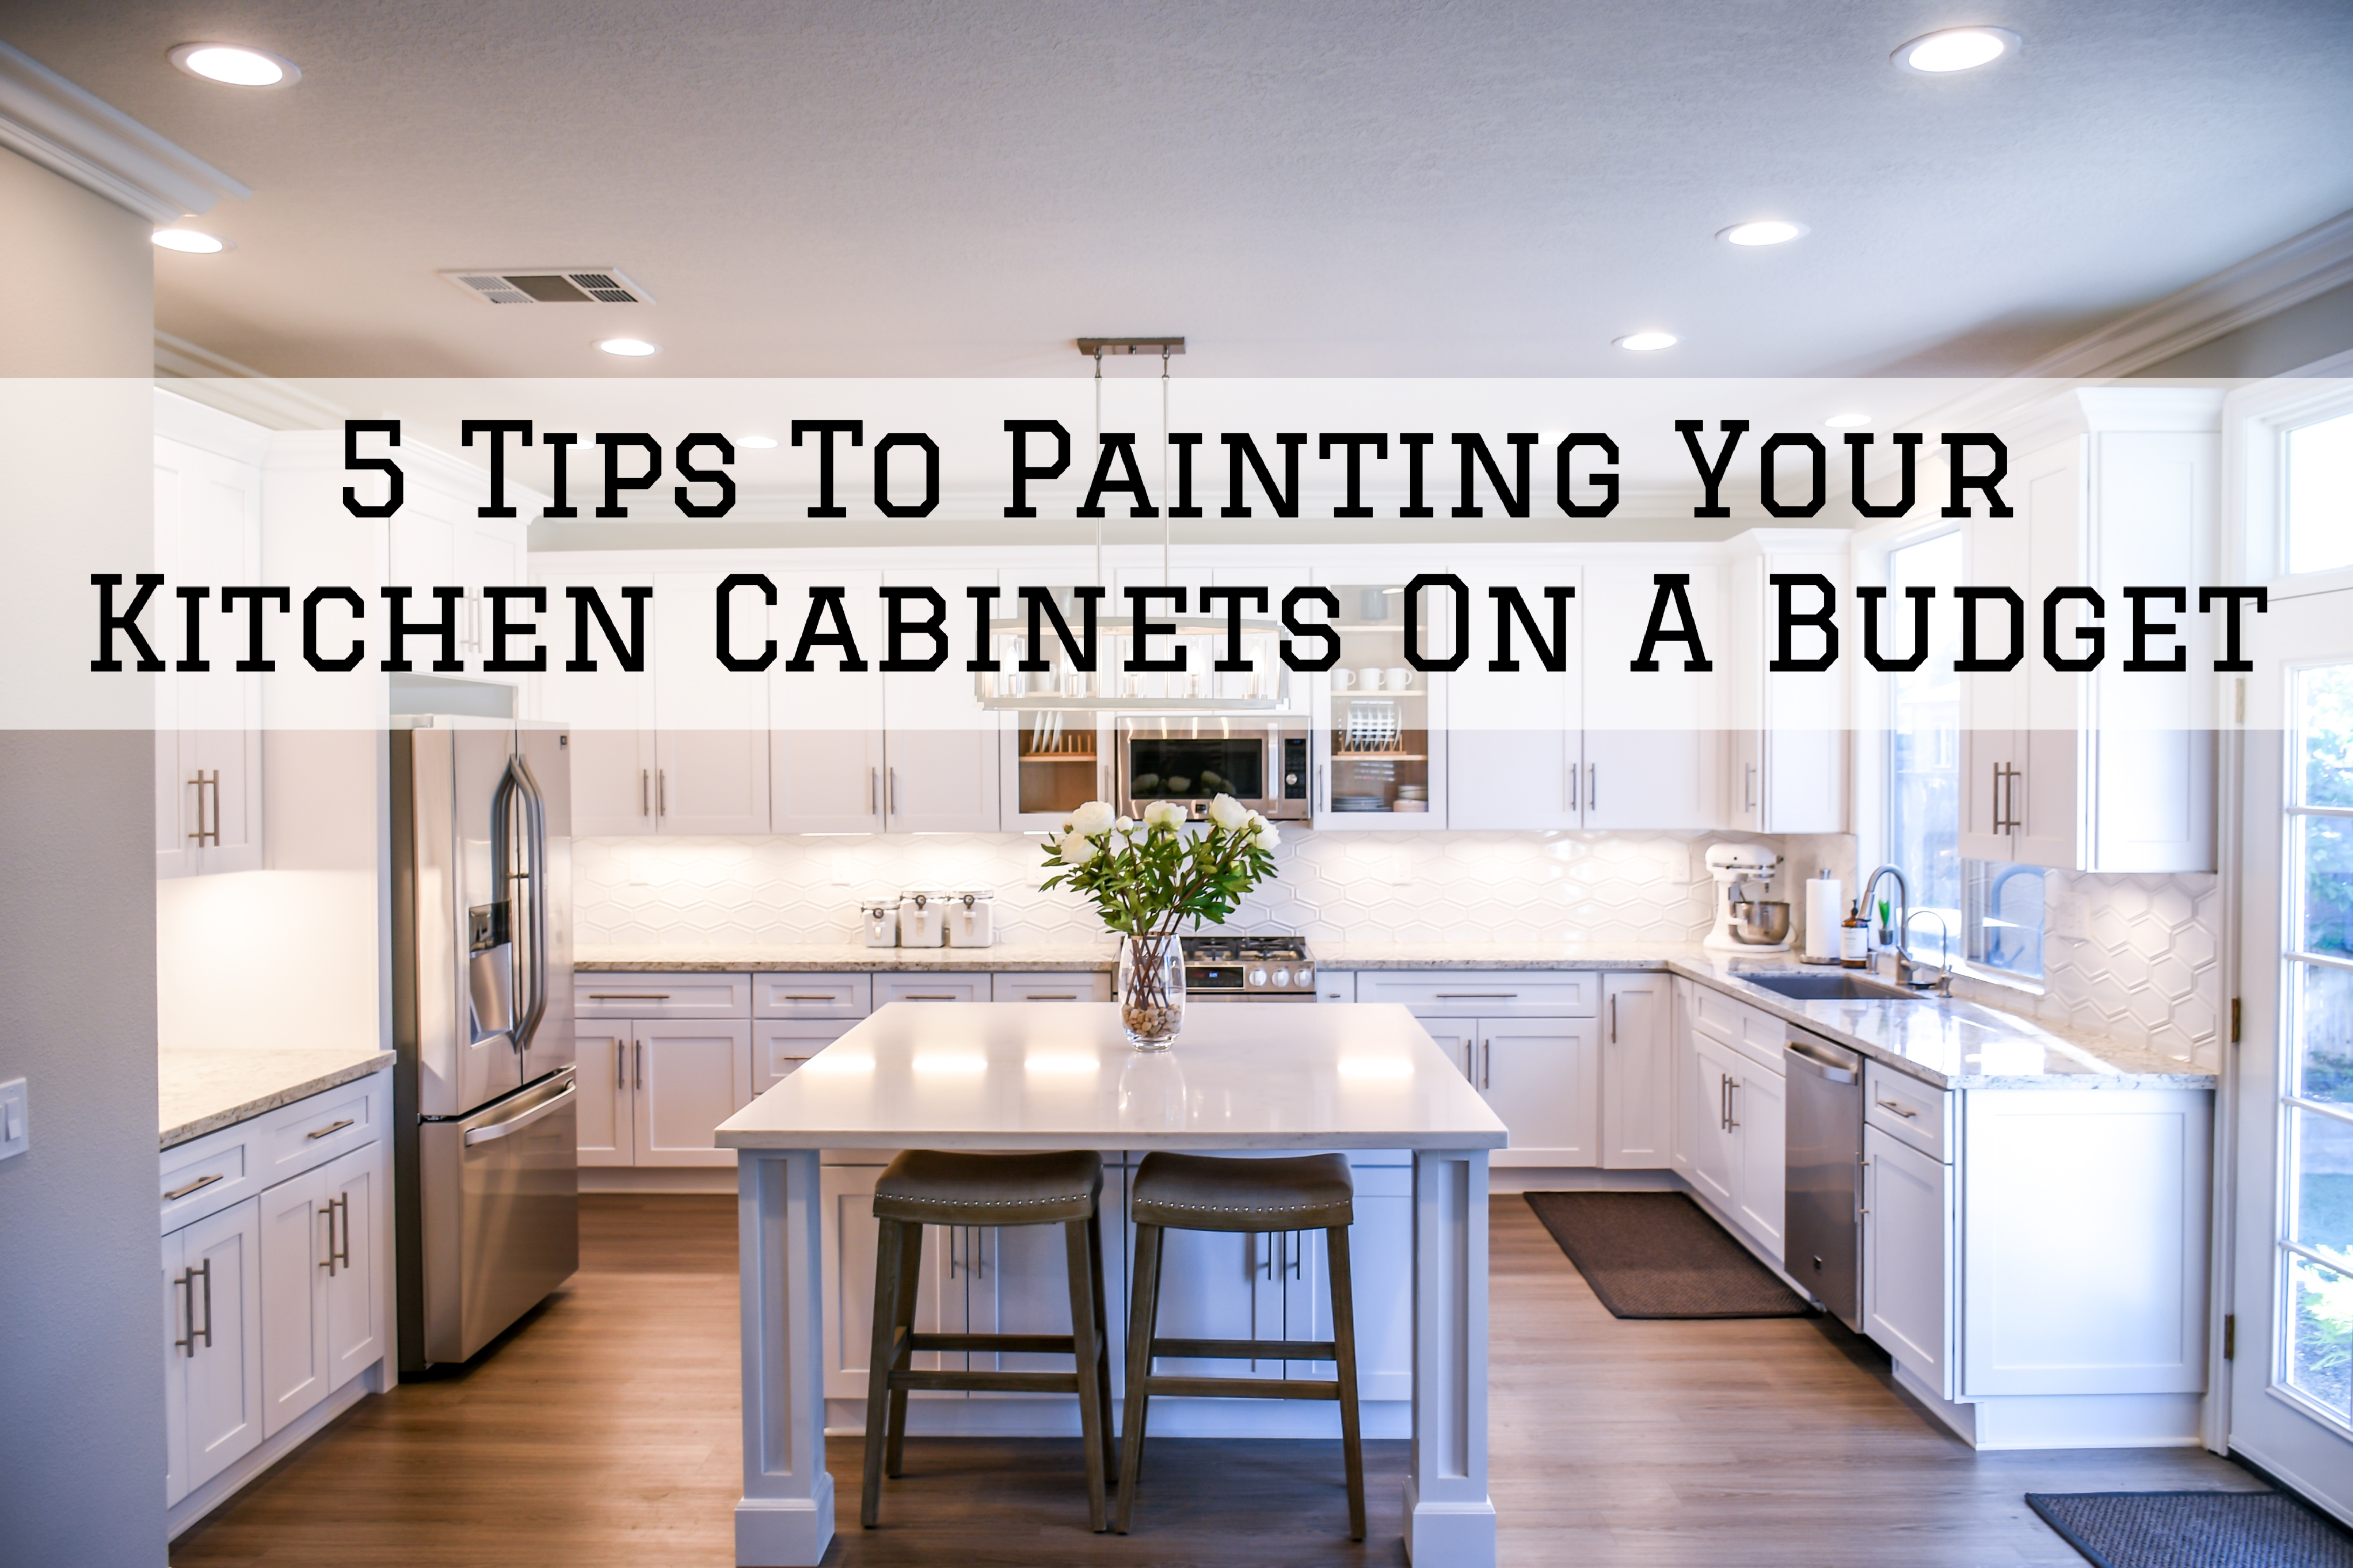 5 Tips To Painting Your Kitchen Cabinets On A Budget in Ottawa, Ontario